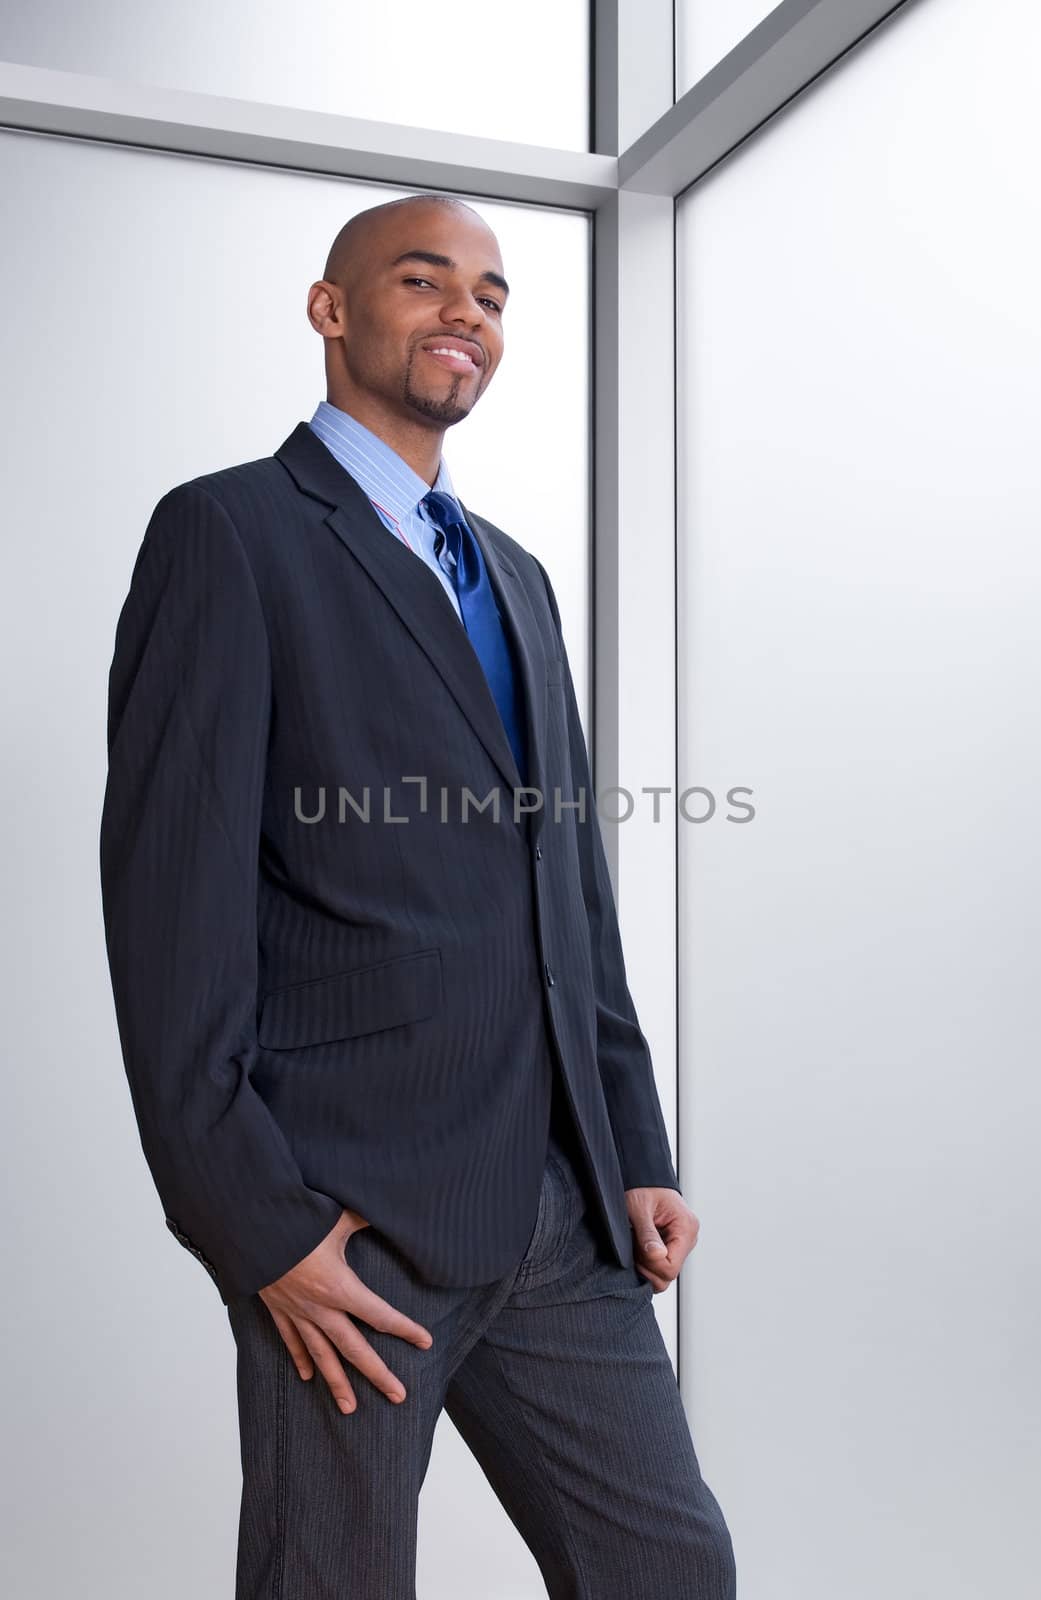 Smiling young business man beside an office window.